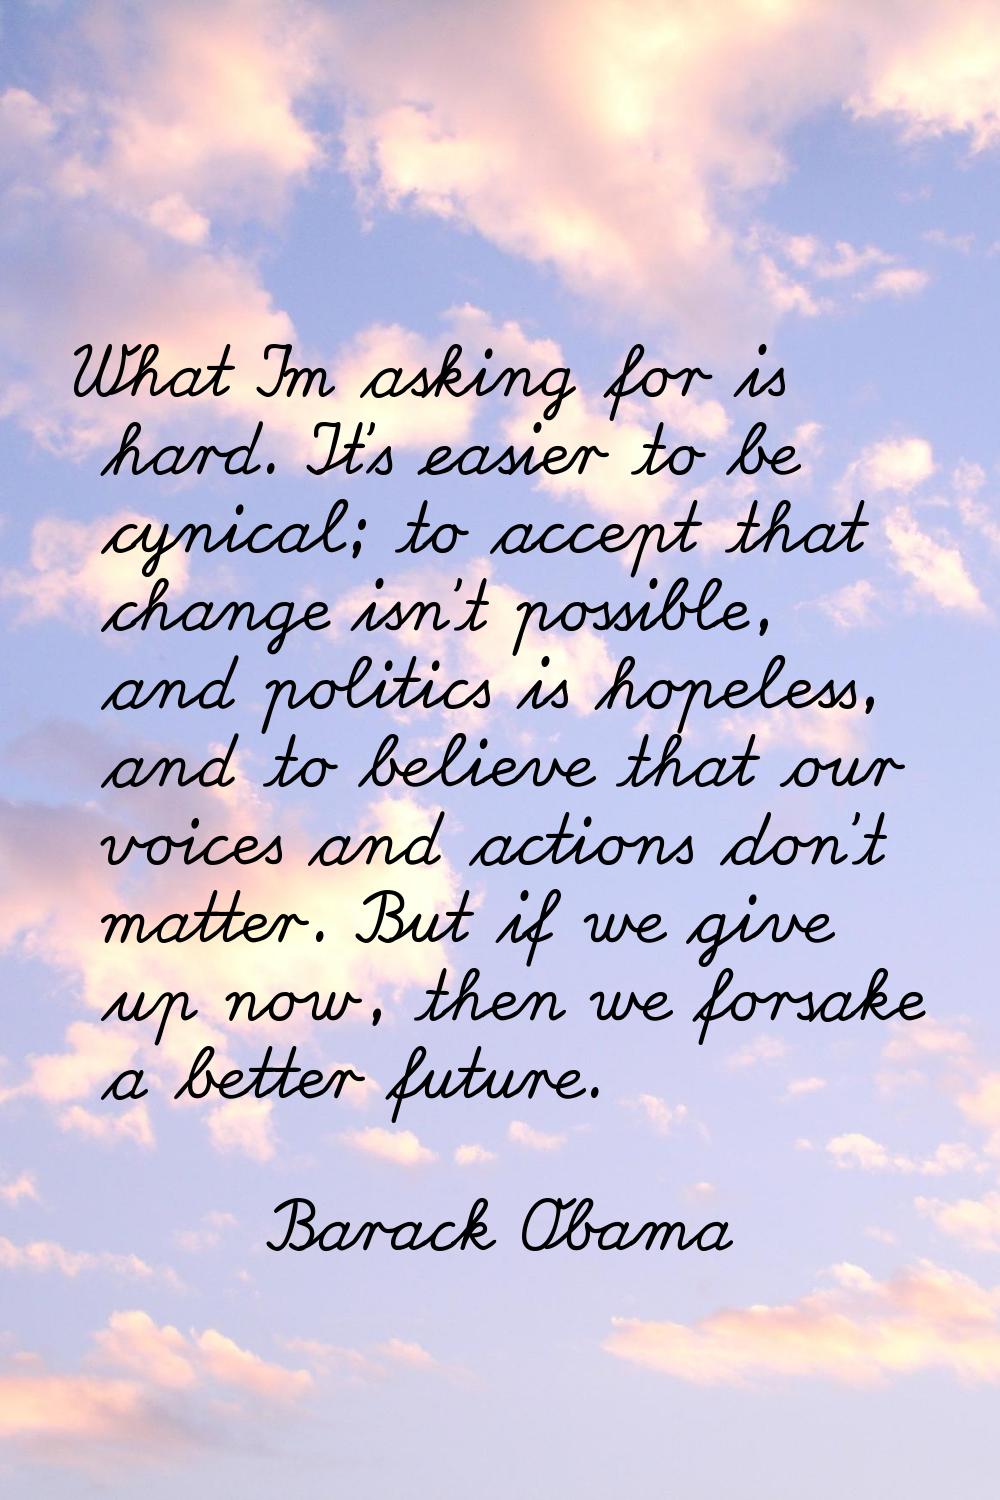 What I'm asking for is hard. It's easier to be cynical; to accept that change isn't possible, and p